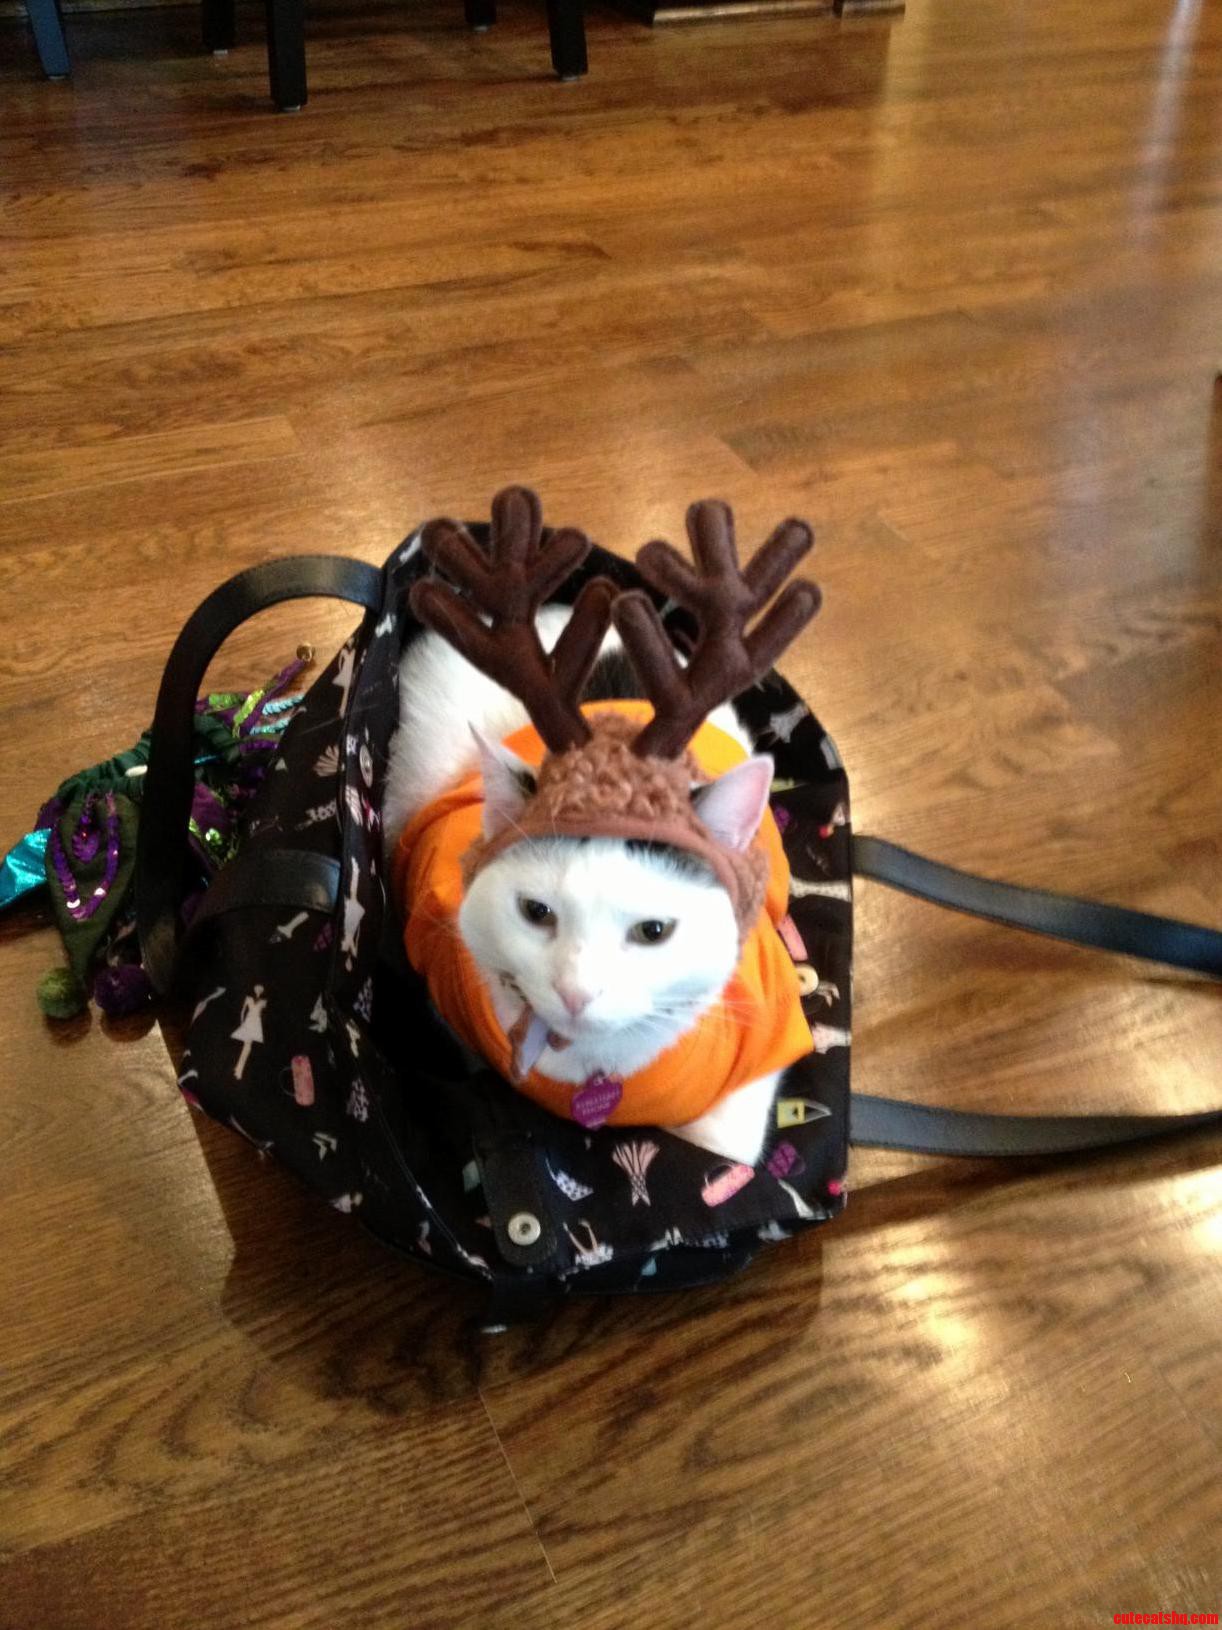 Just A Cat With A Reindeer Hat Sitting In A Bag.